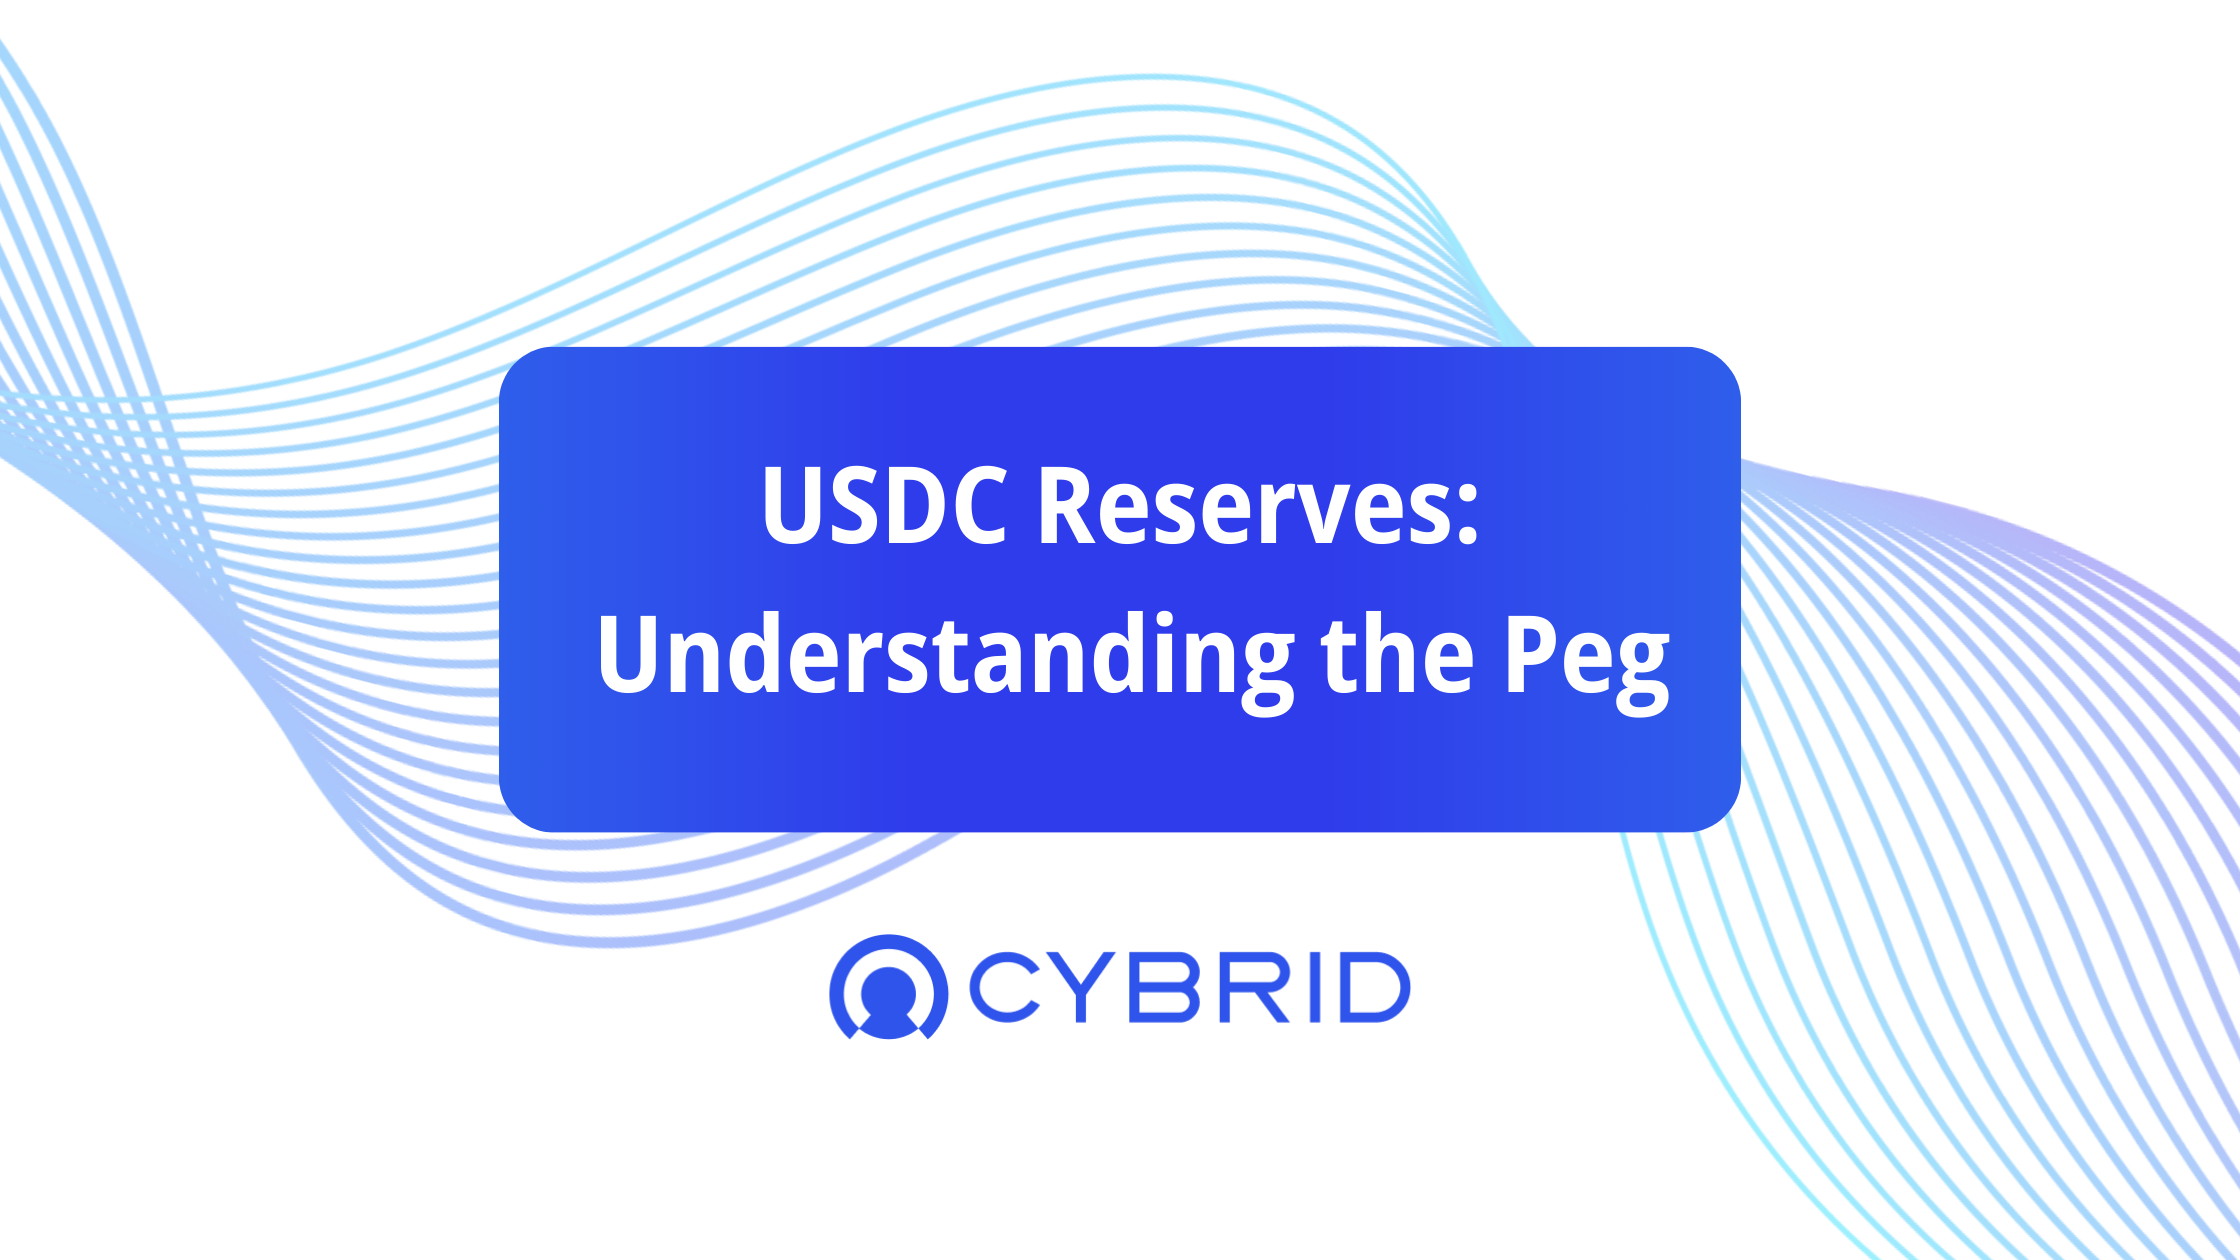 Deeper Dive: Is USDC fully reserved?